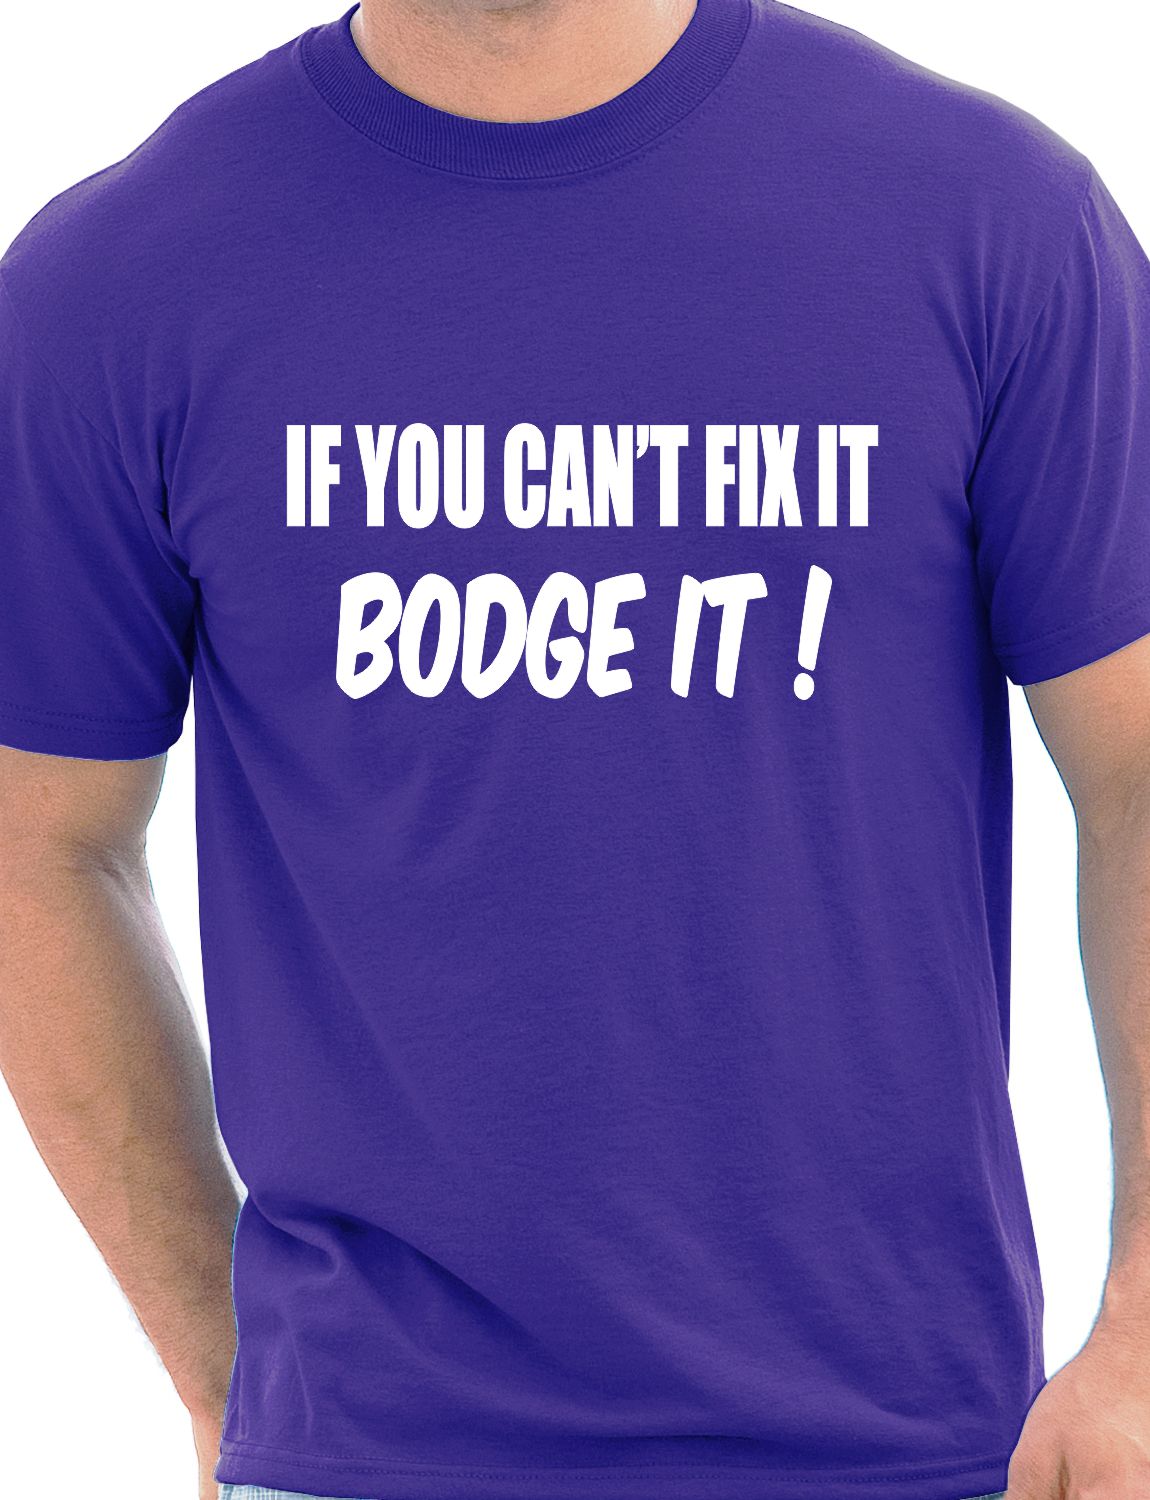 If You Can't Fix it Bodge It Funny Builder DIY Mens T-shirt Size S-XXL